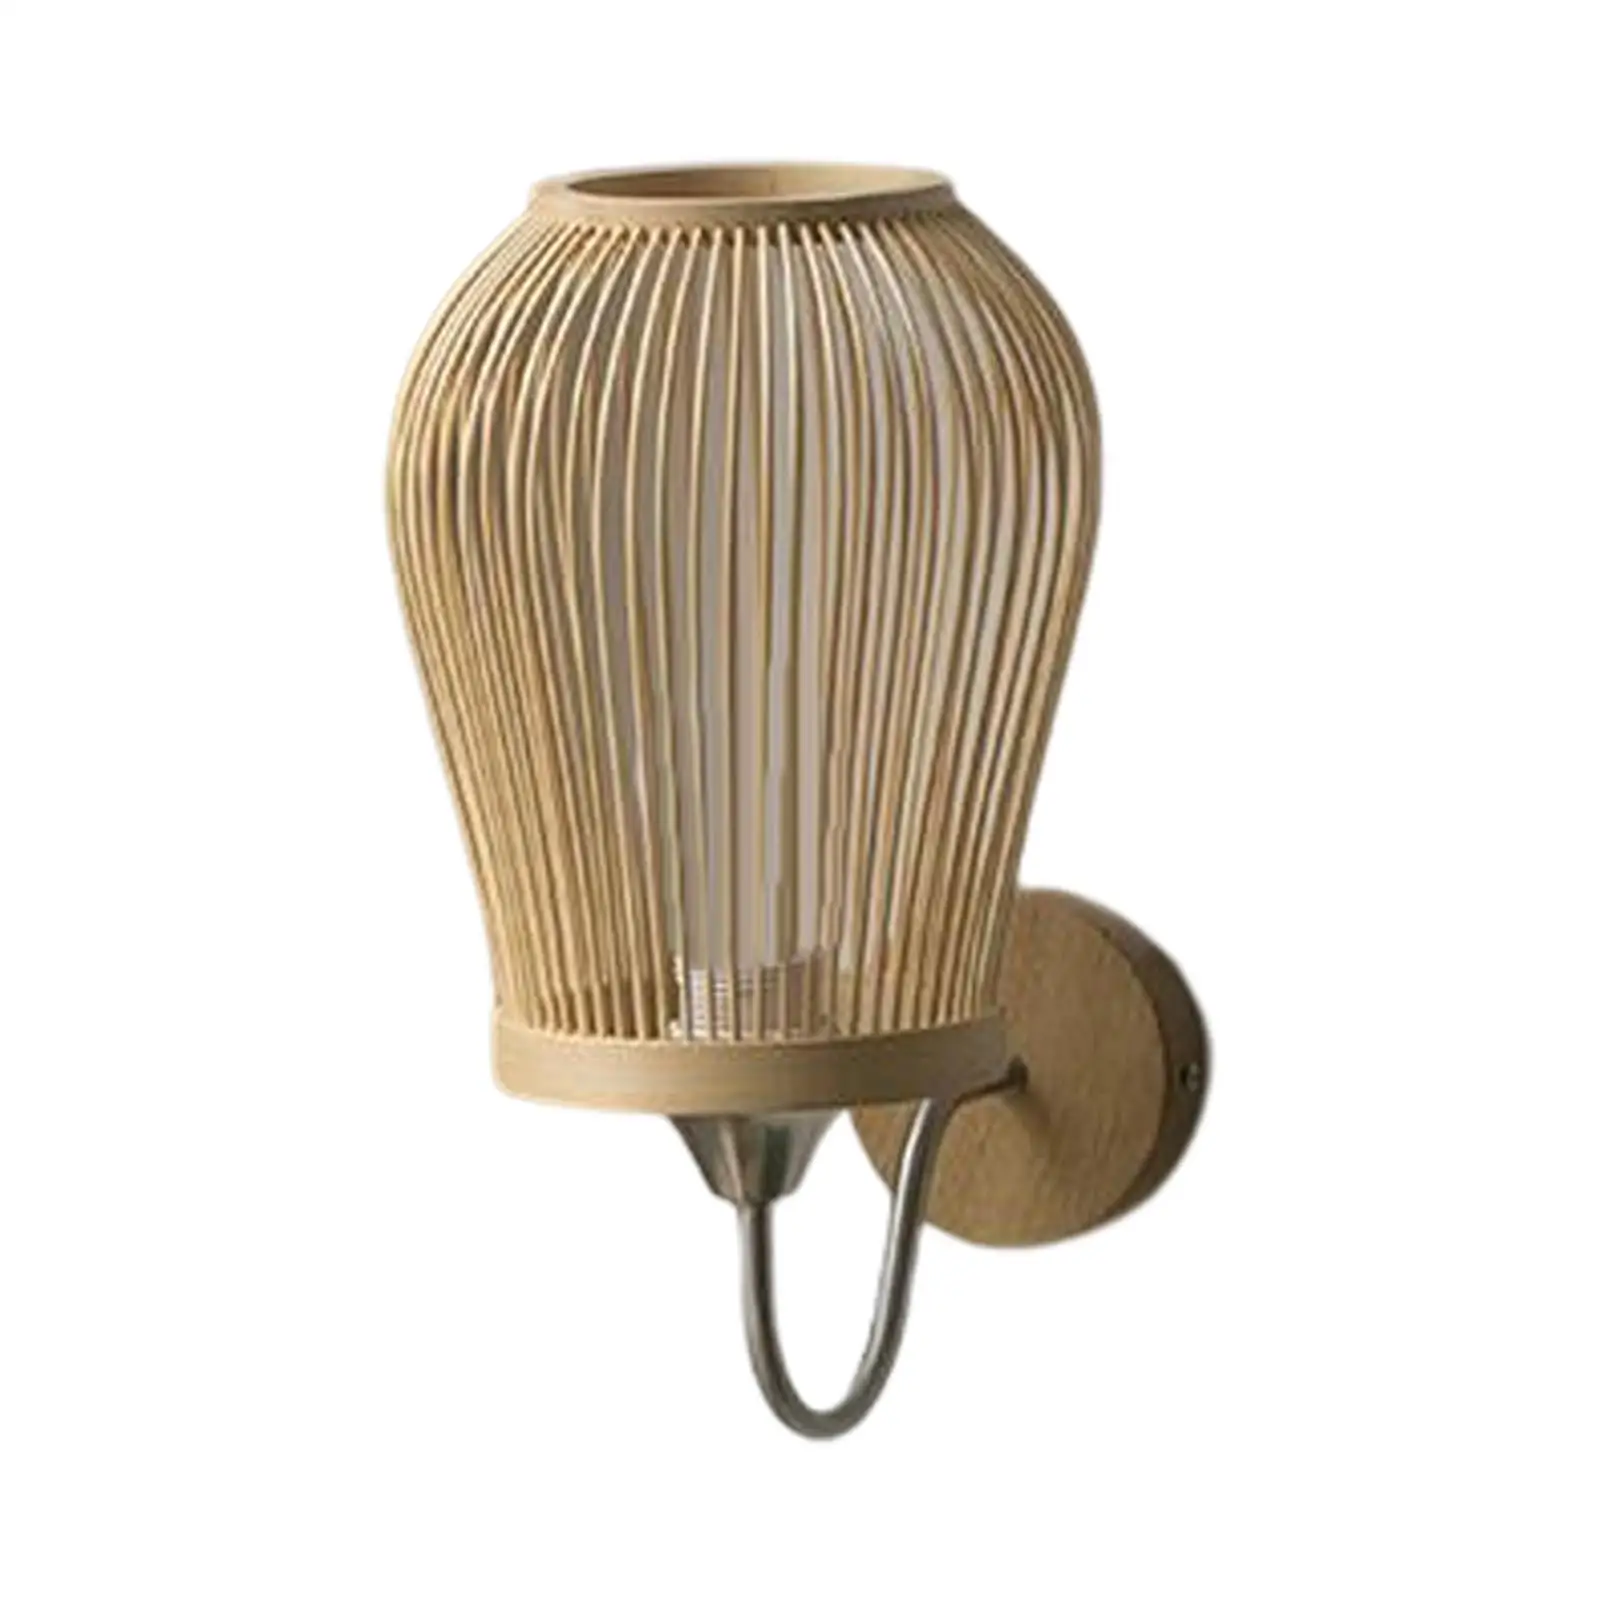 Bamboo Wall Mounted Sconce Lamp Light E27 Base Lighting Retro Style Farmhouse Decorative for Kitchen Study Home Bedroom